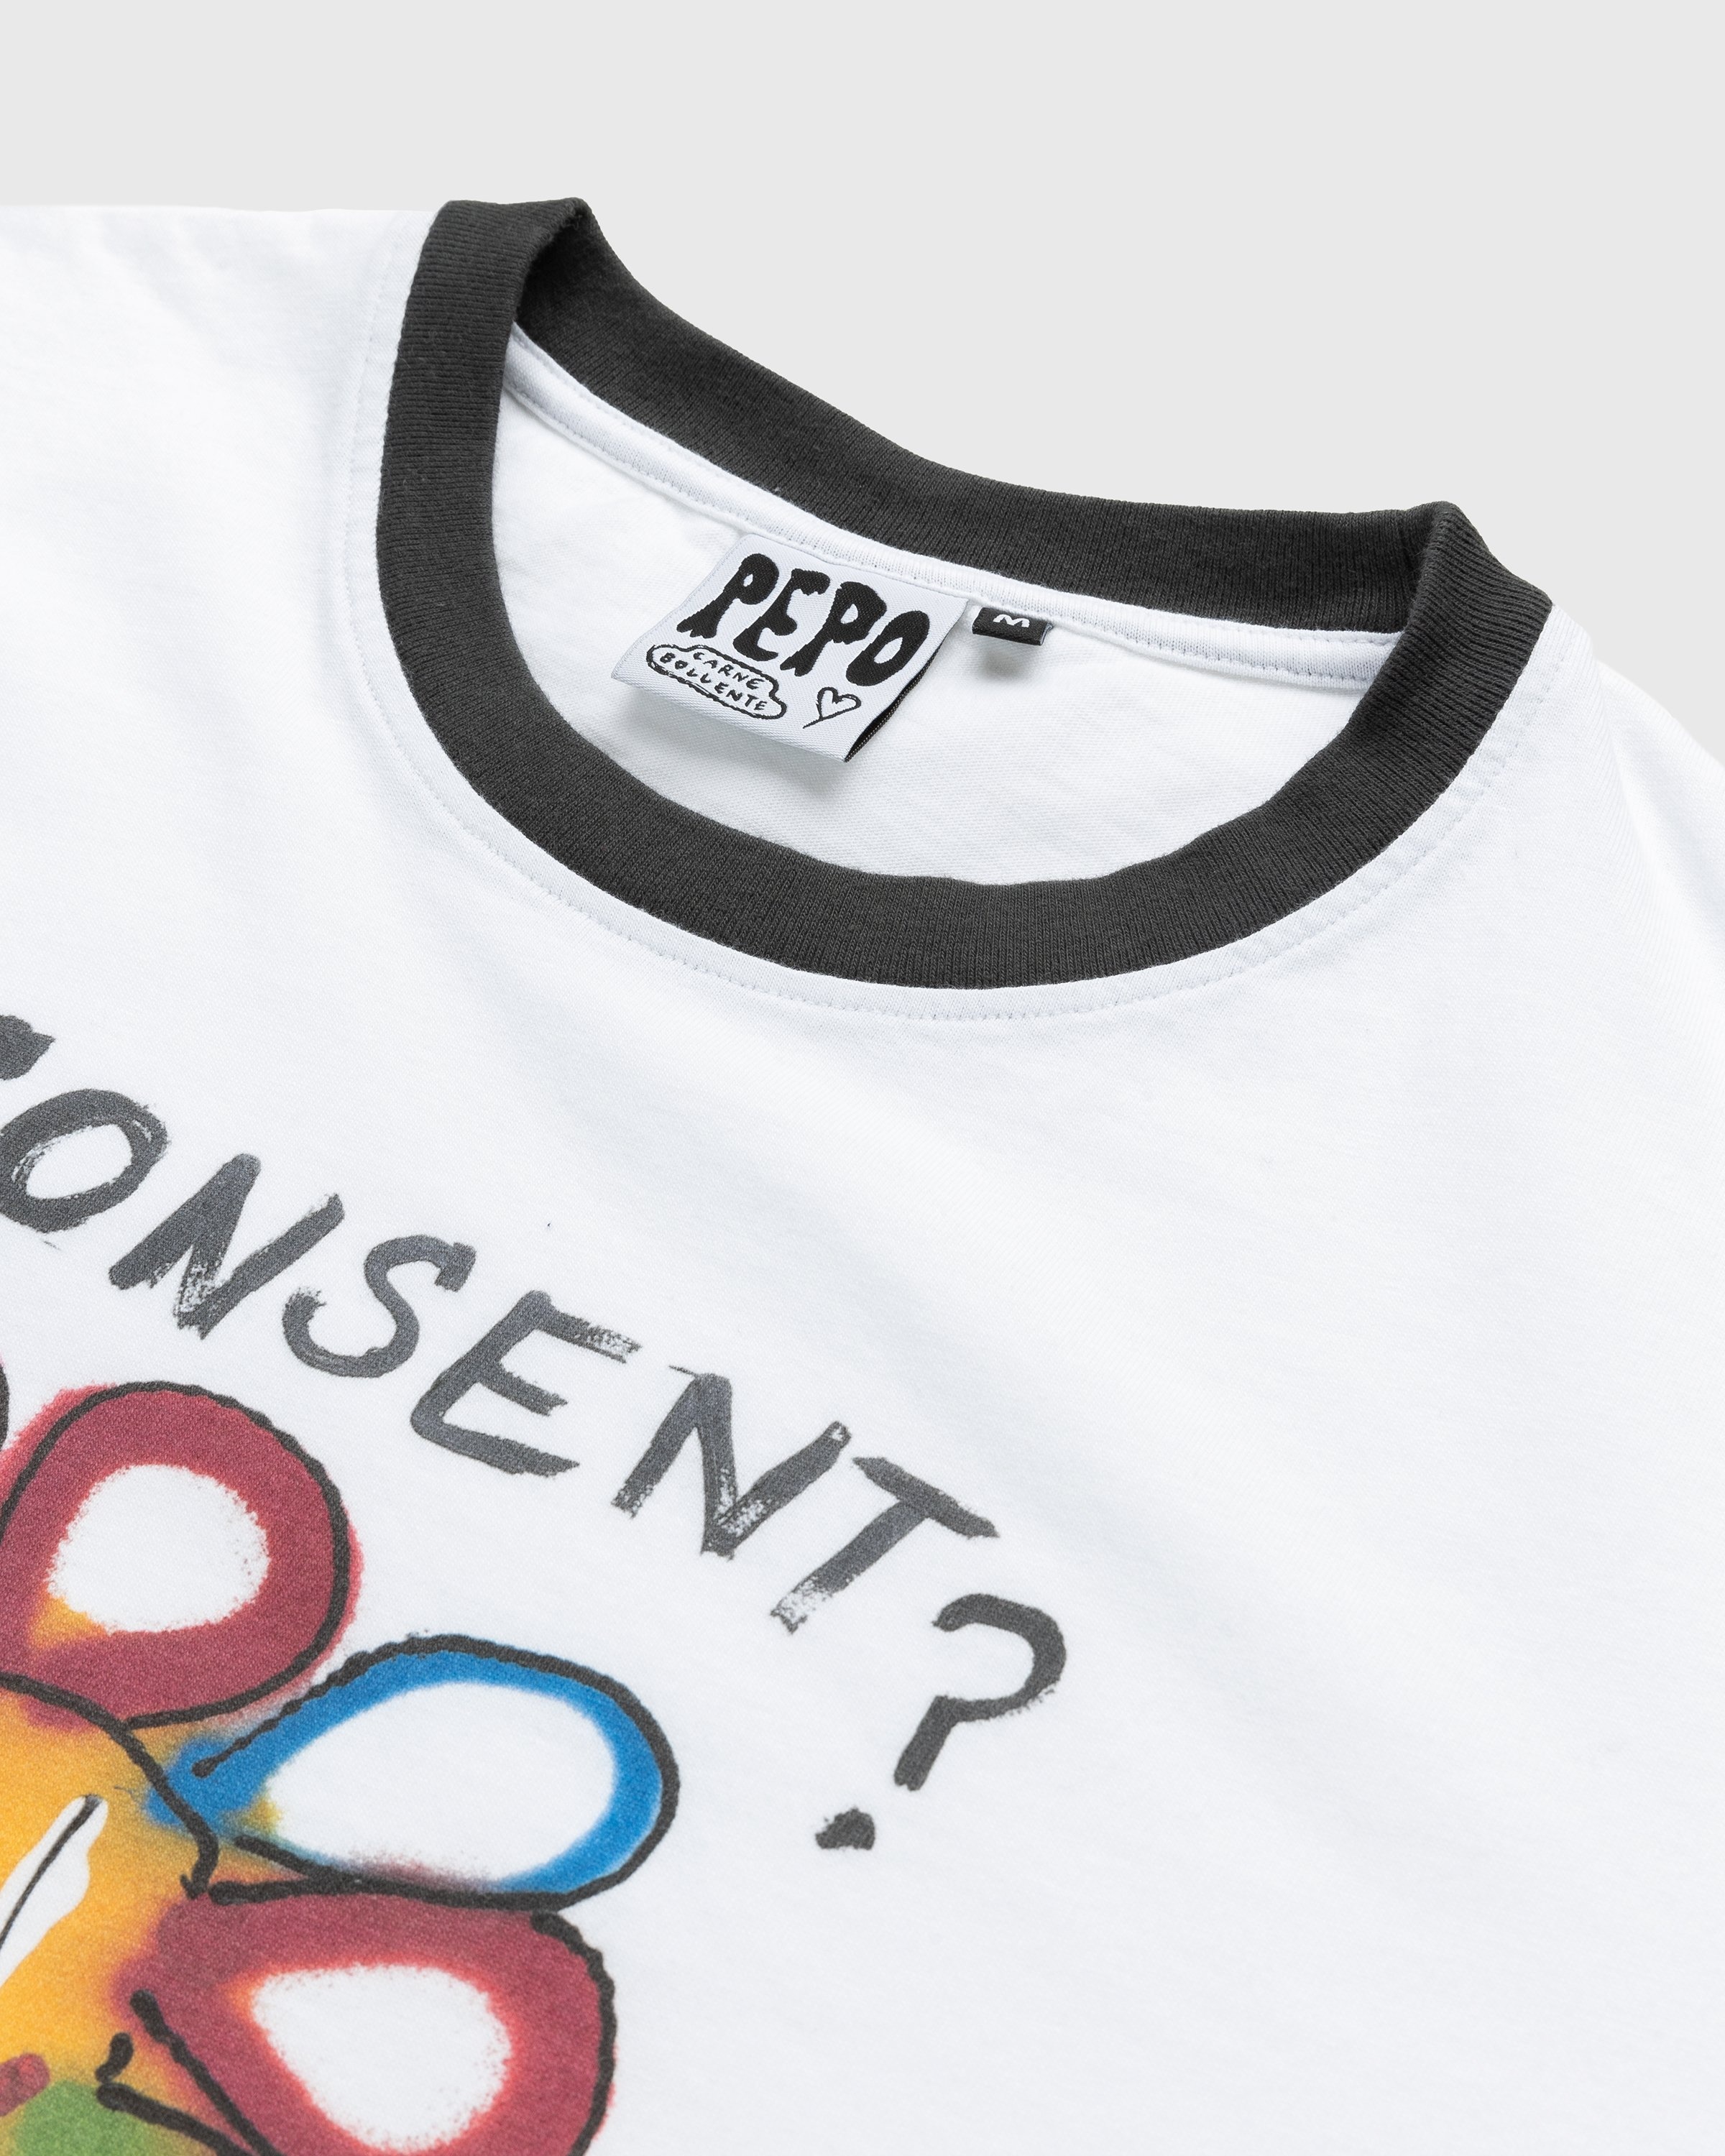 Carne Bollente – Consent? Yes, Please! T-Shirt White